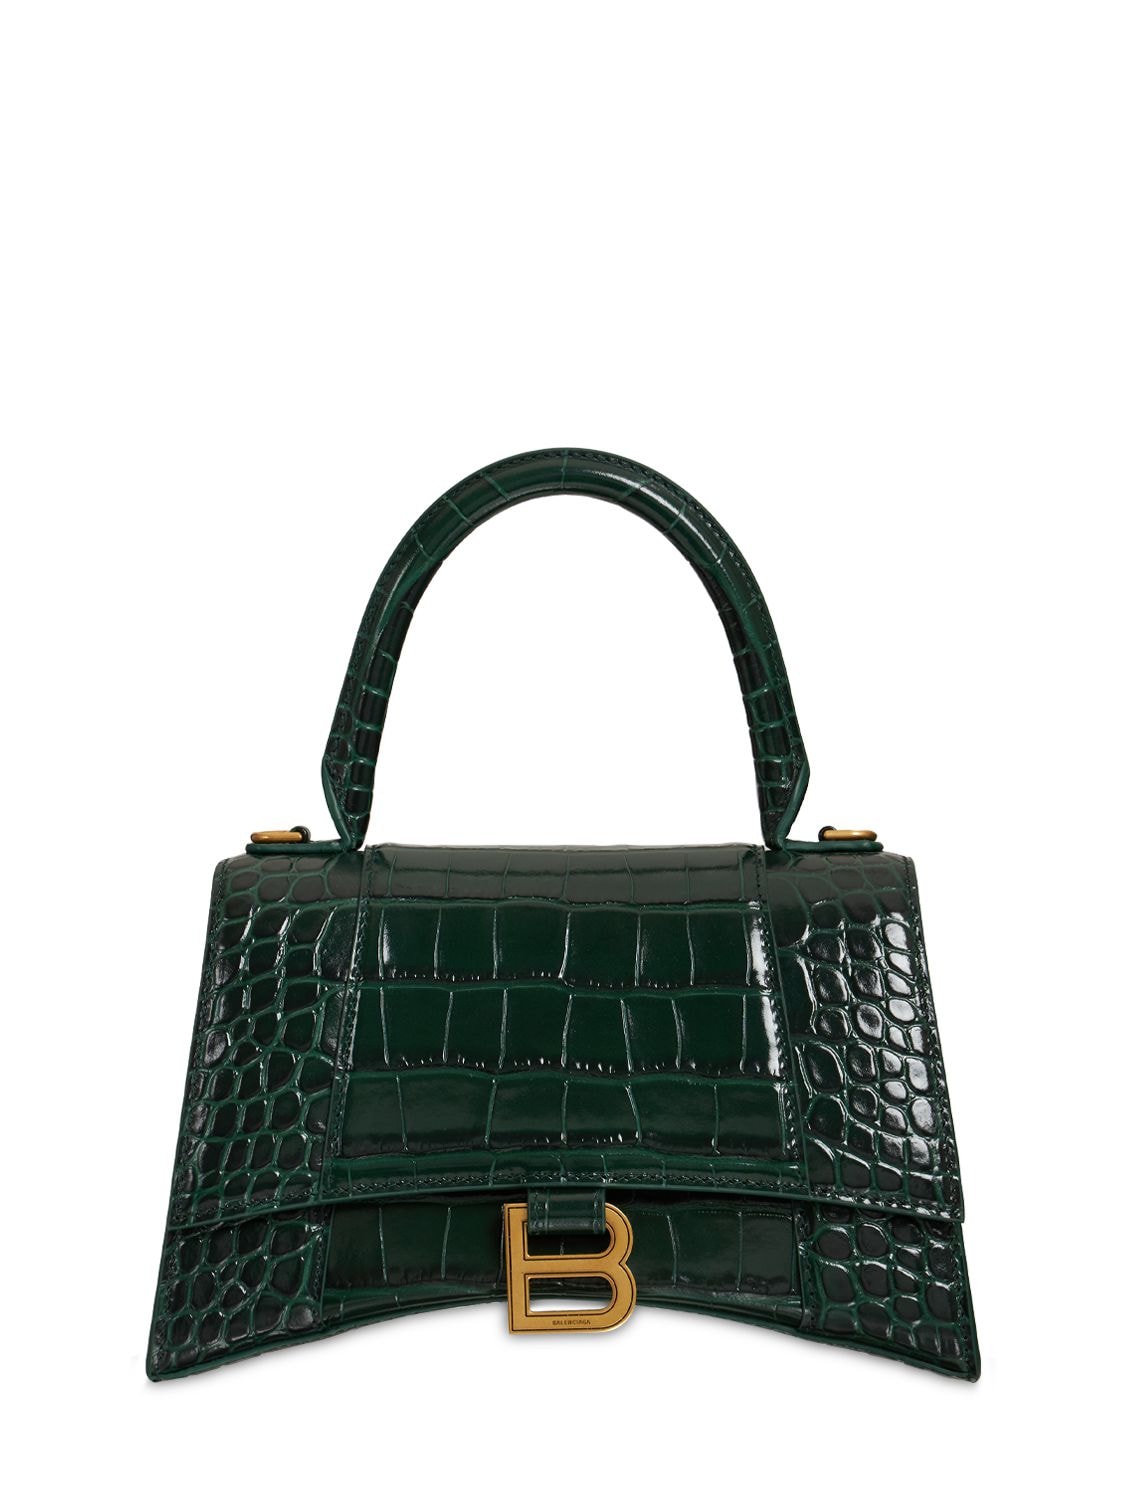 Balenciaga Hourglass Croc Embossed Leather Bag In 녹색 | ModeSens